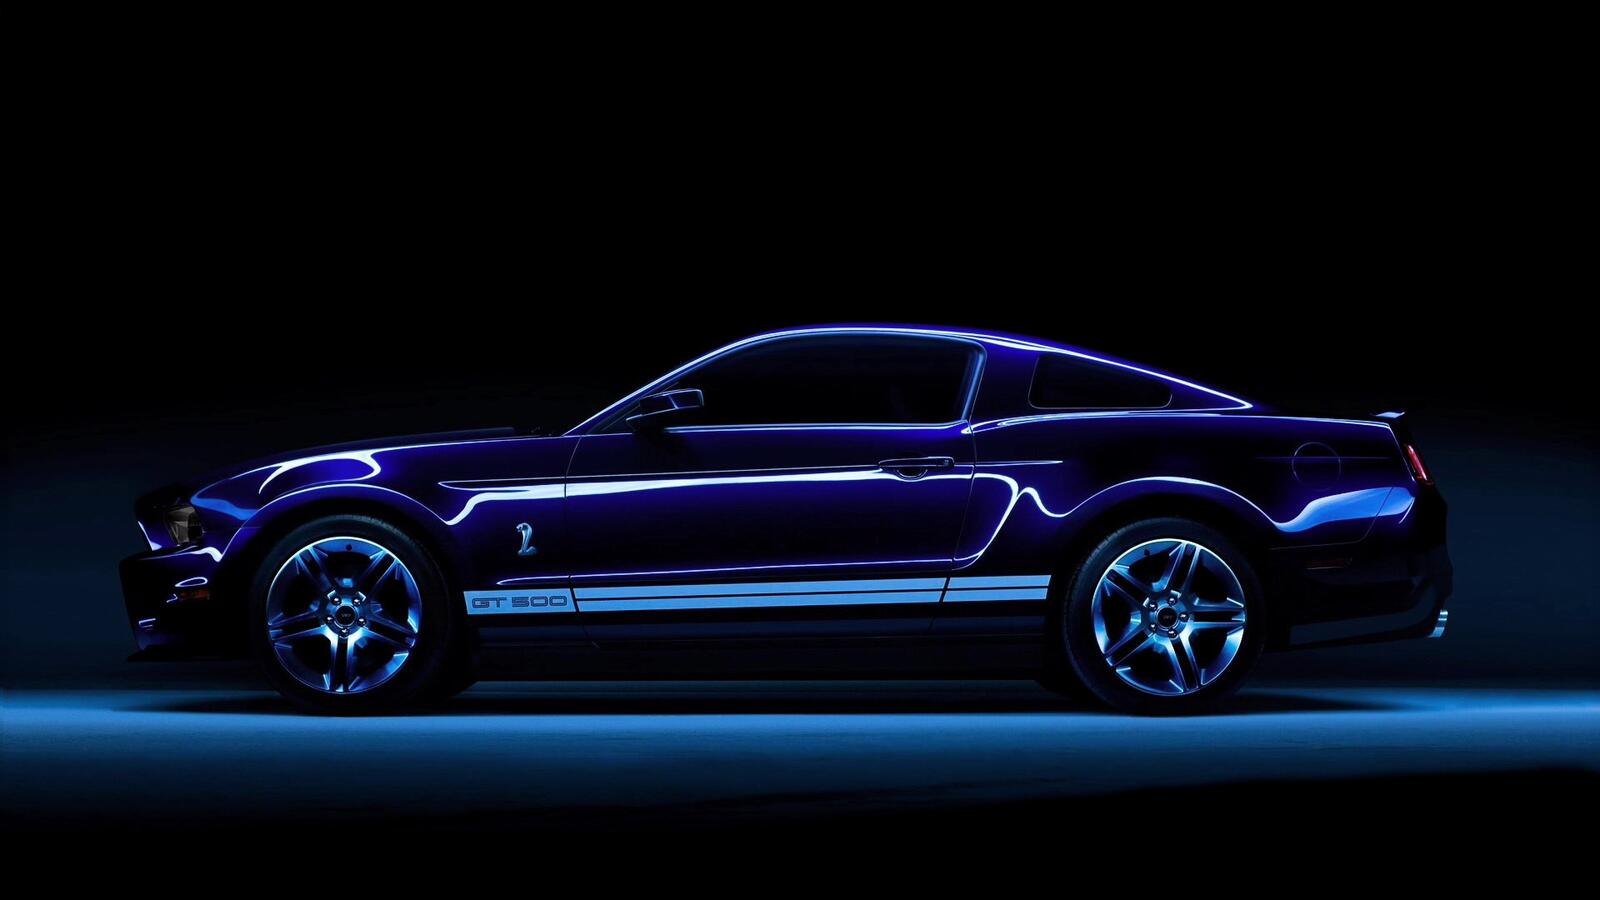 Wallpapers side view Ford Mustang Shelby GT 500 cars on the desktop